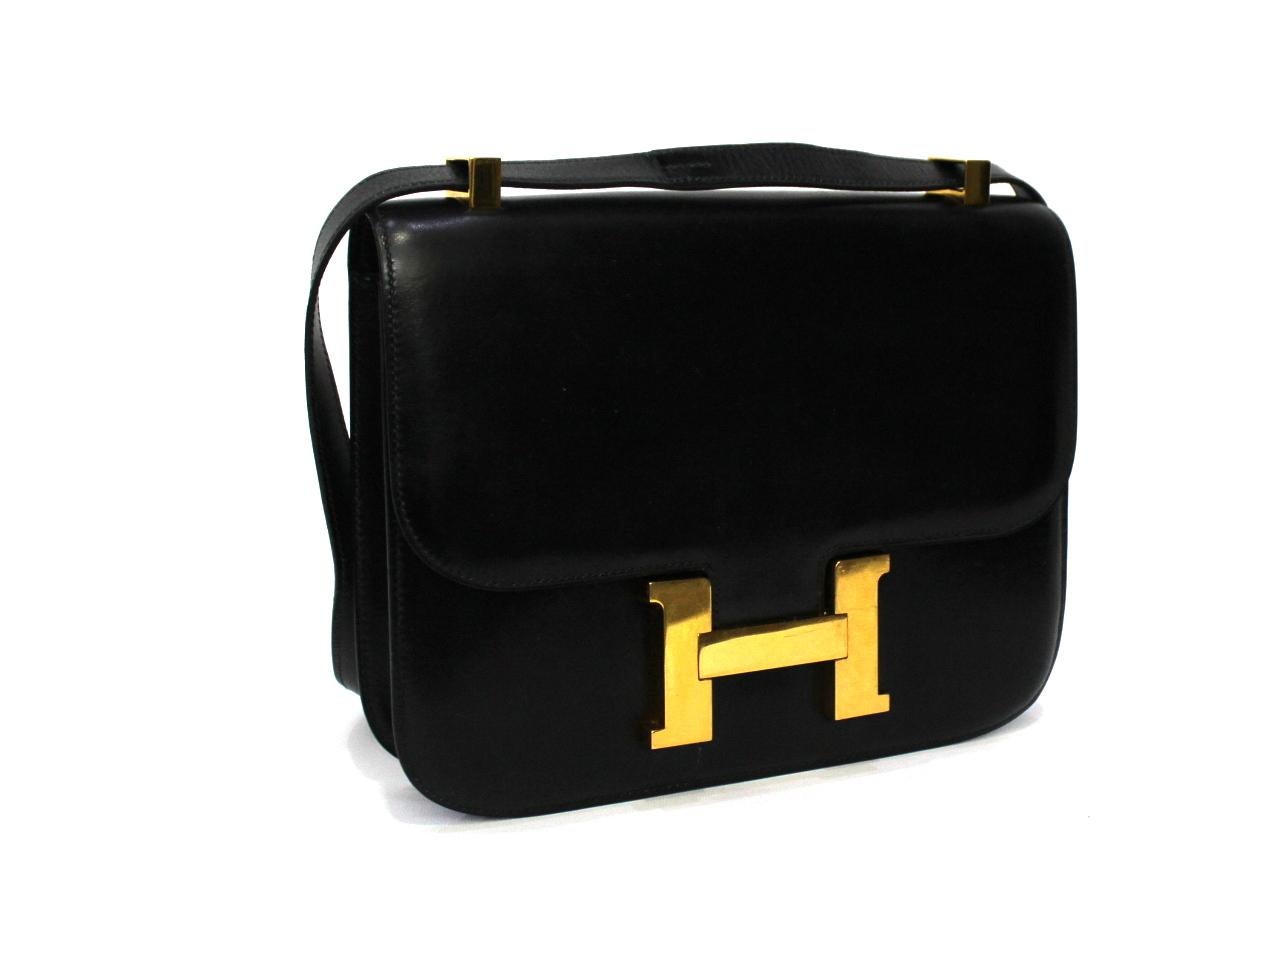 Hermès Constance model bag made of smooth black leather with golden hardware.
Closing with category H, internally capacious for the essentials. Adjustable leather shoulder strap, to wear it however you like. The bag to be a vintage product (1996) is